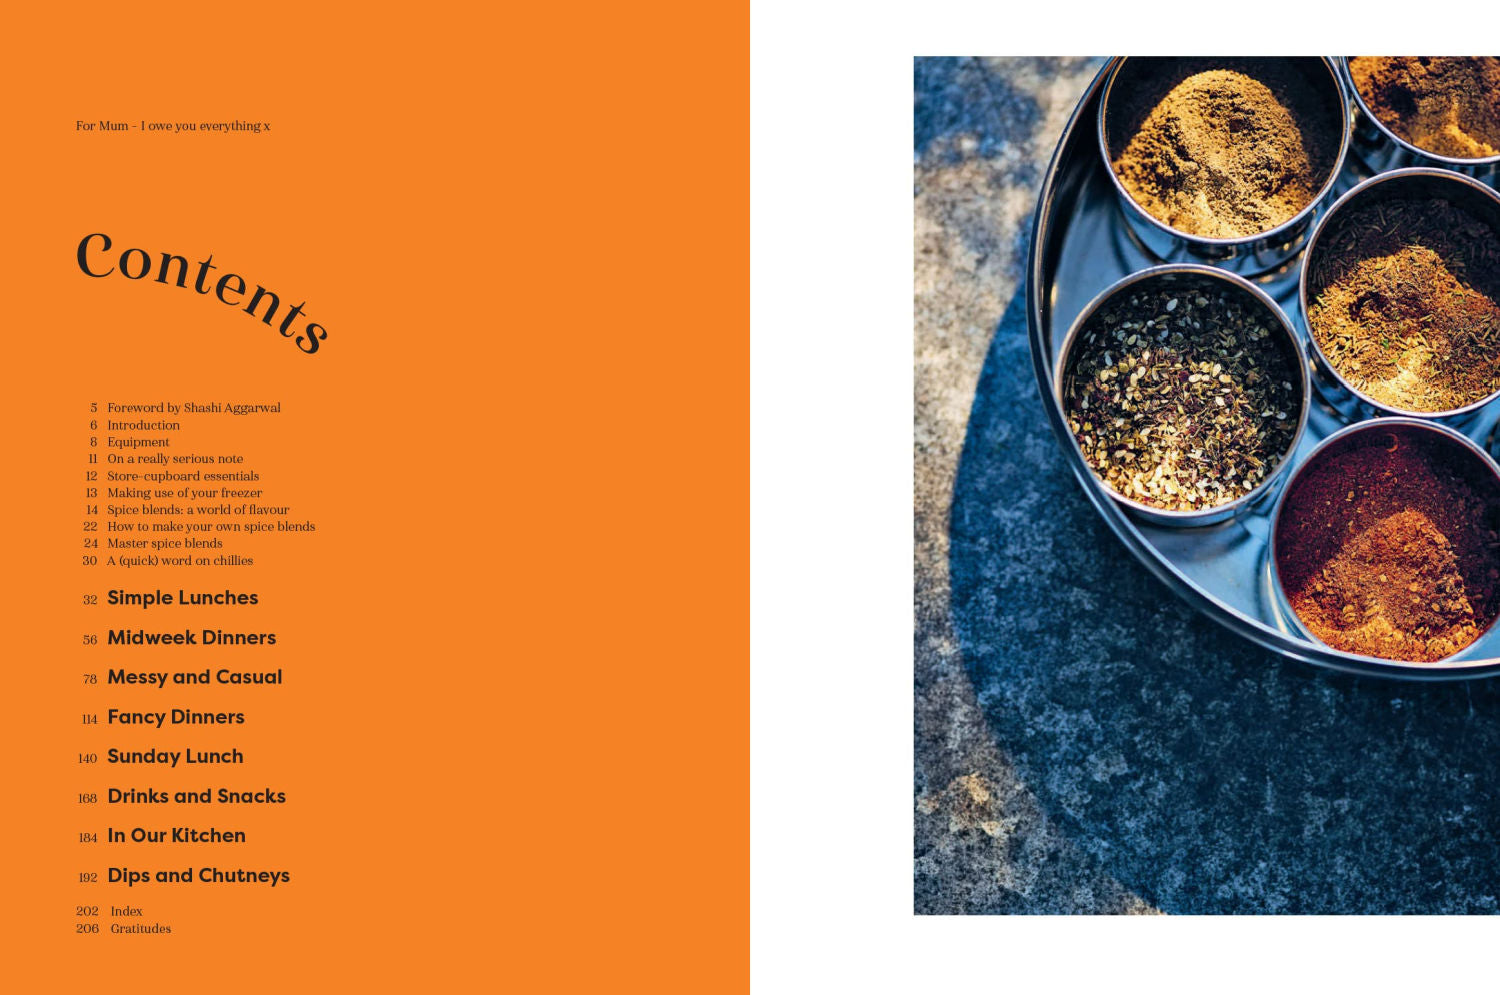 Spice Kitchen: Vibrant Recipes And Spice Blends For The Home Cook  / SANJAY AGGARWAL - COMING OCT. 11TH!